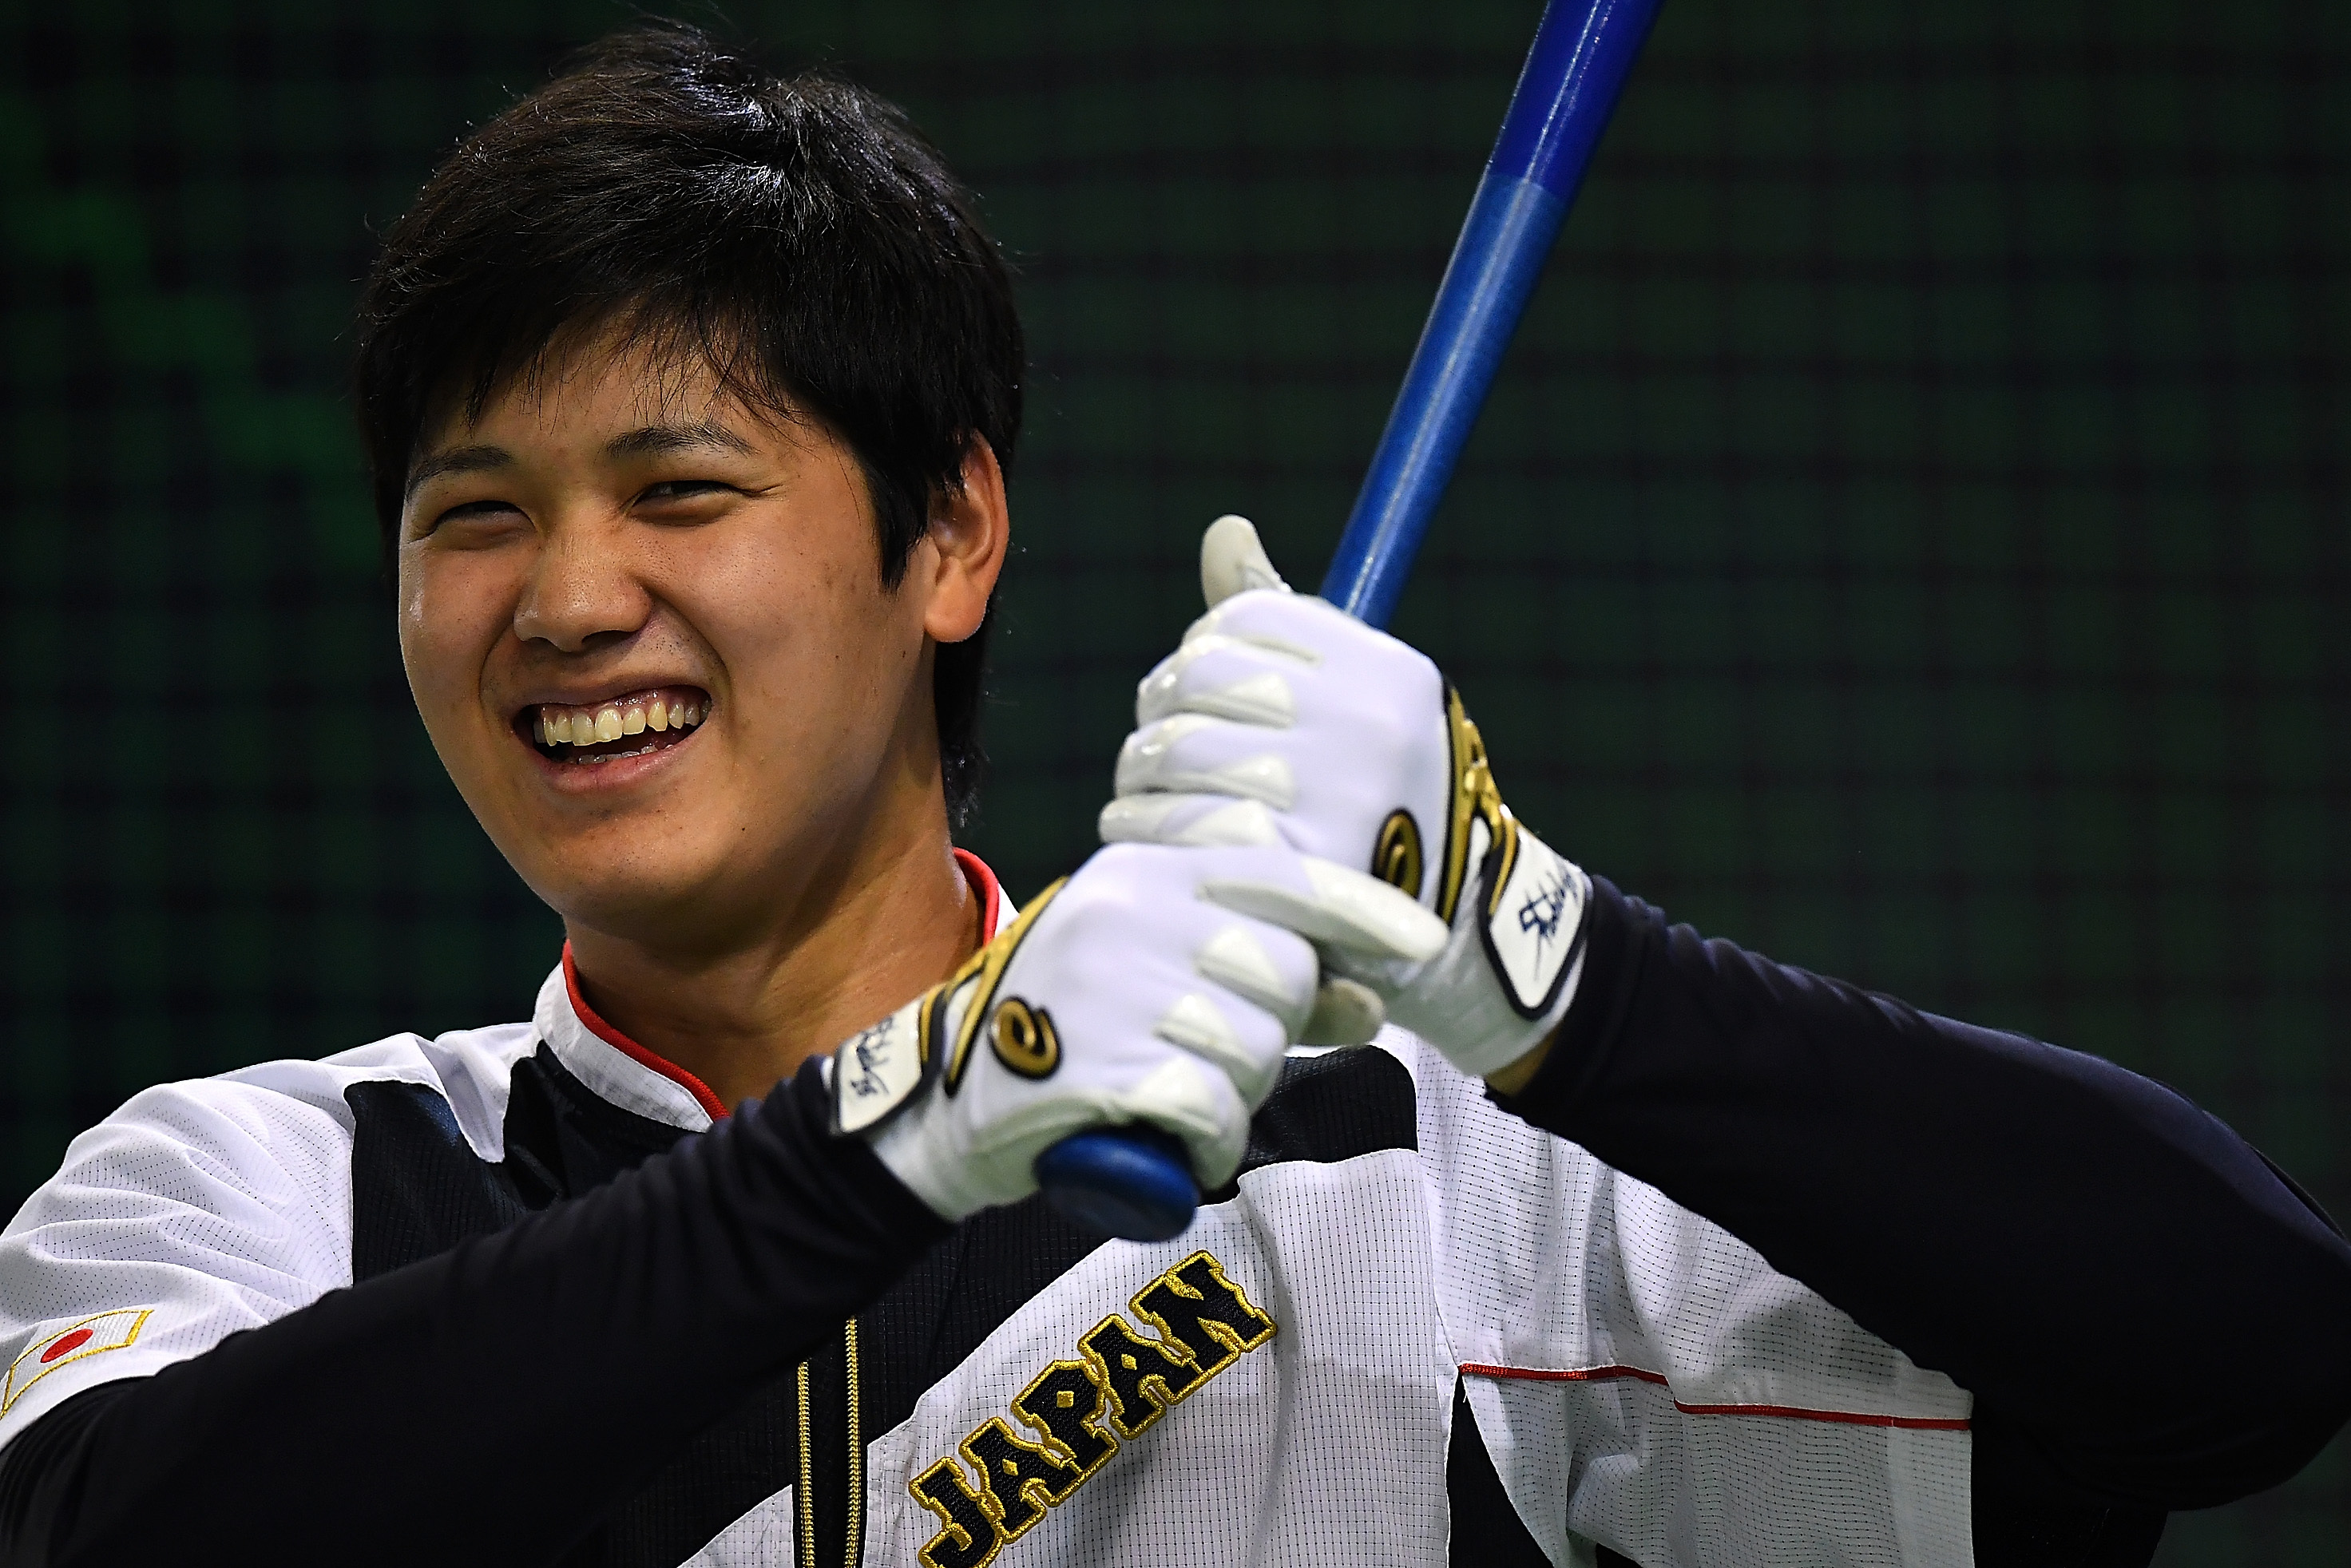 In Photos: Shohei Ohtani, from baseball loving boy in Japan to MLB